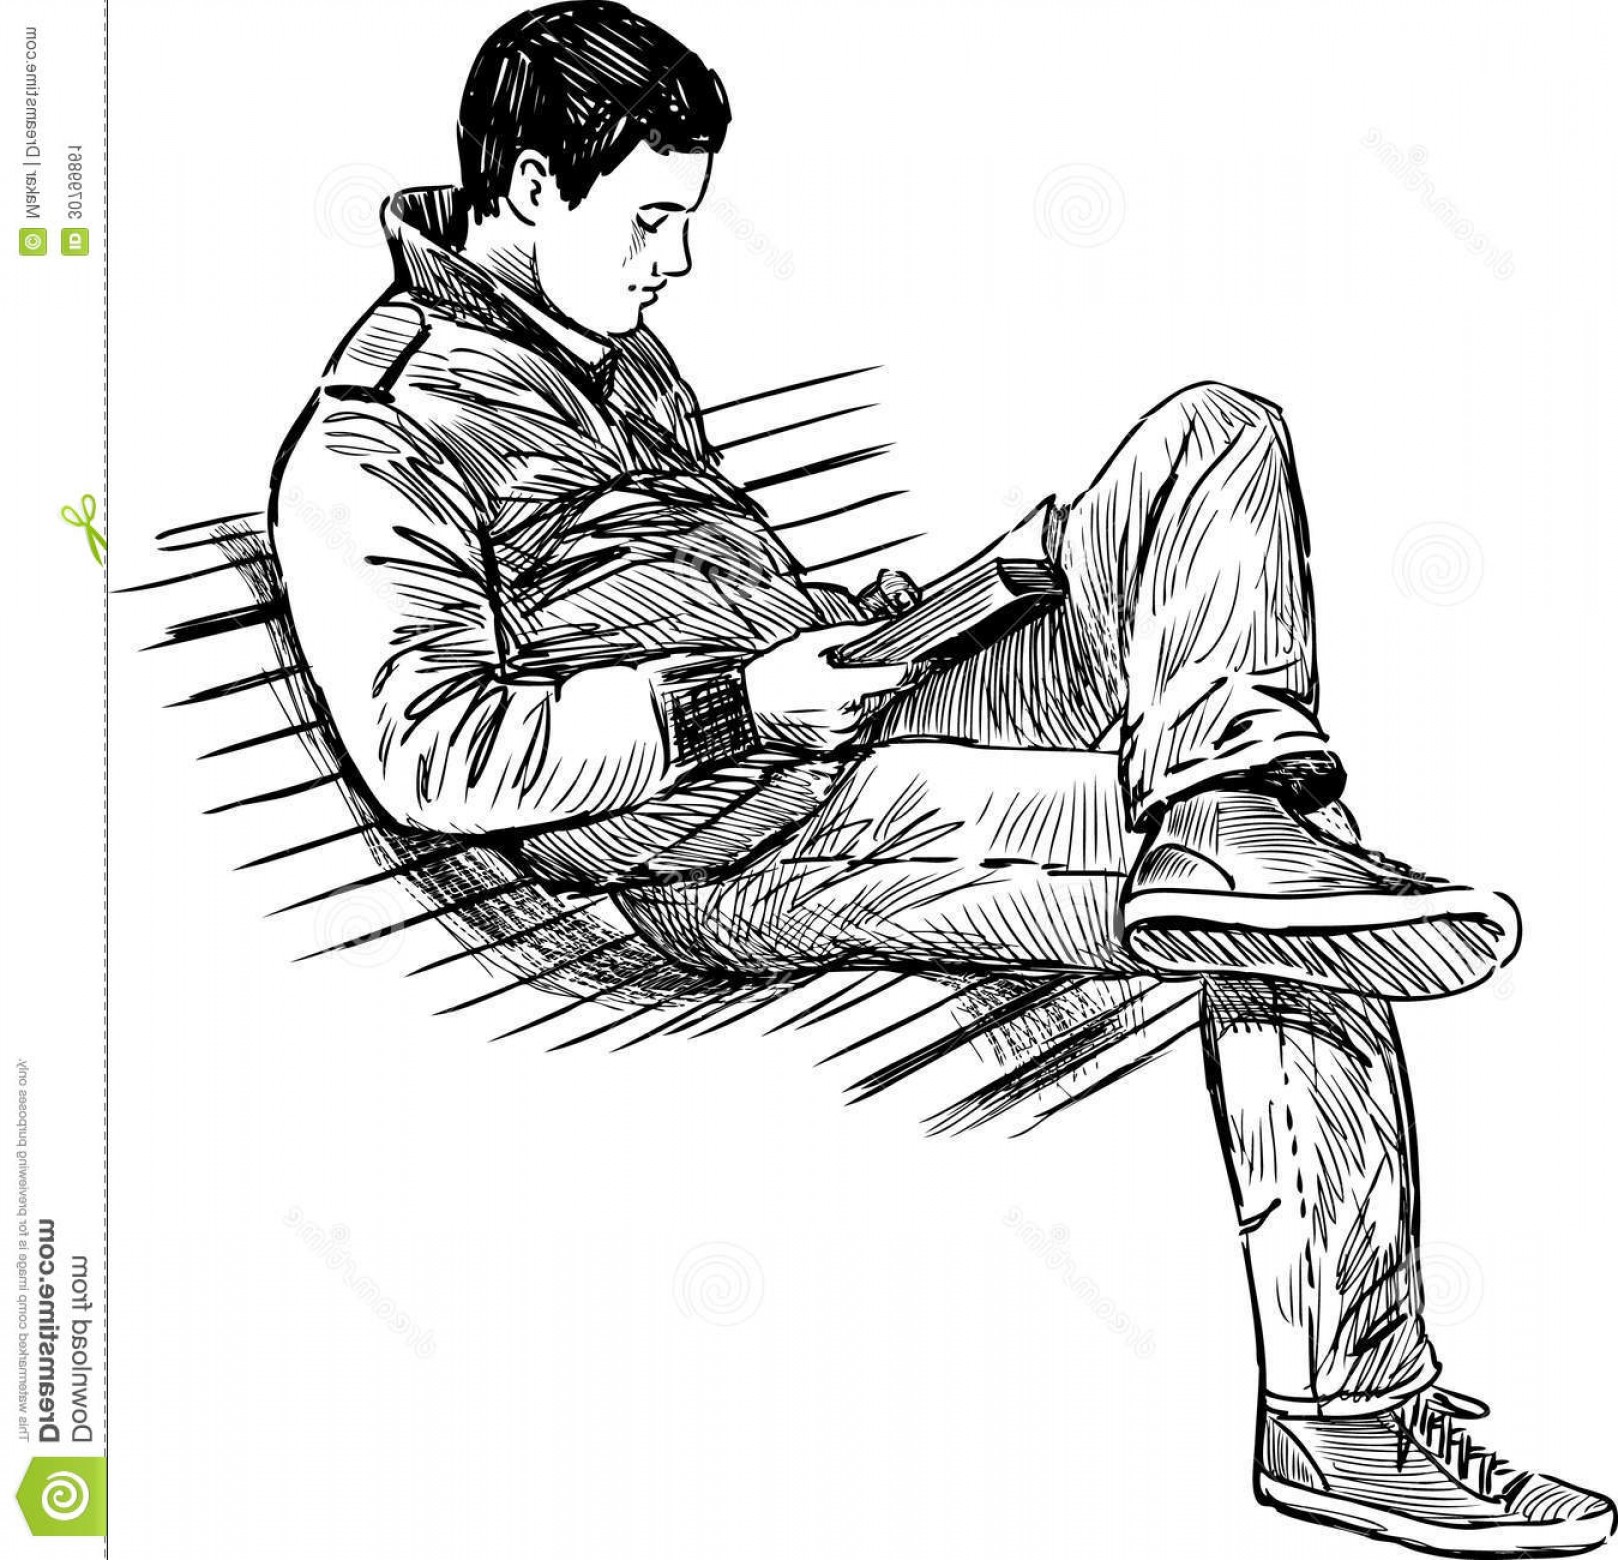 How To Draw People Sitting On A Bench - BENCH